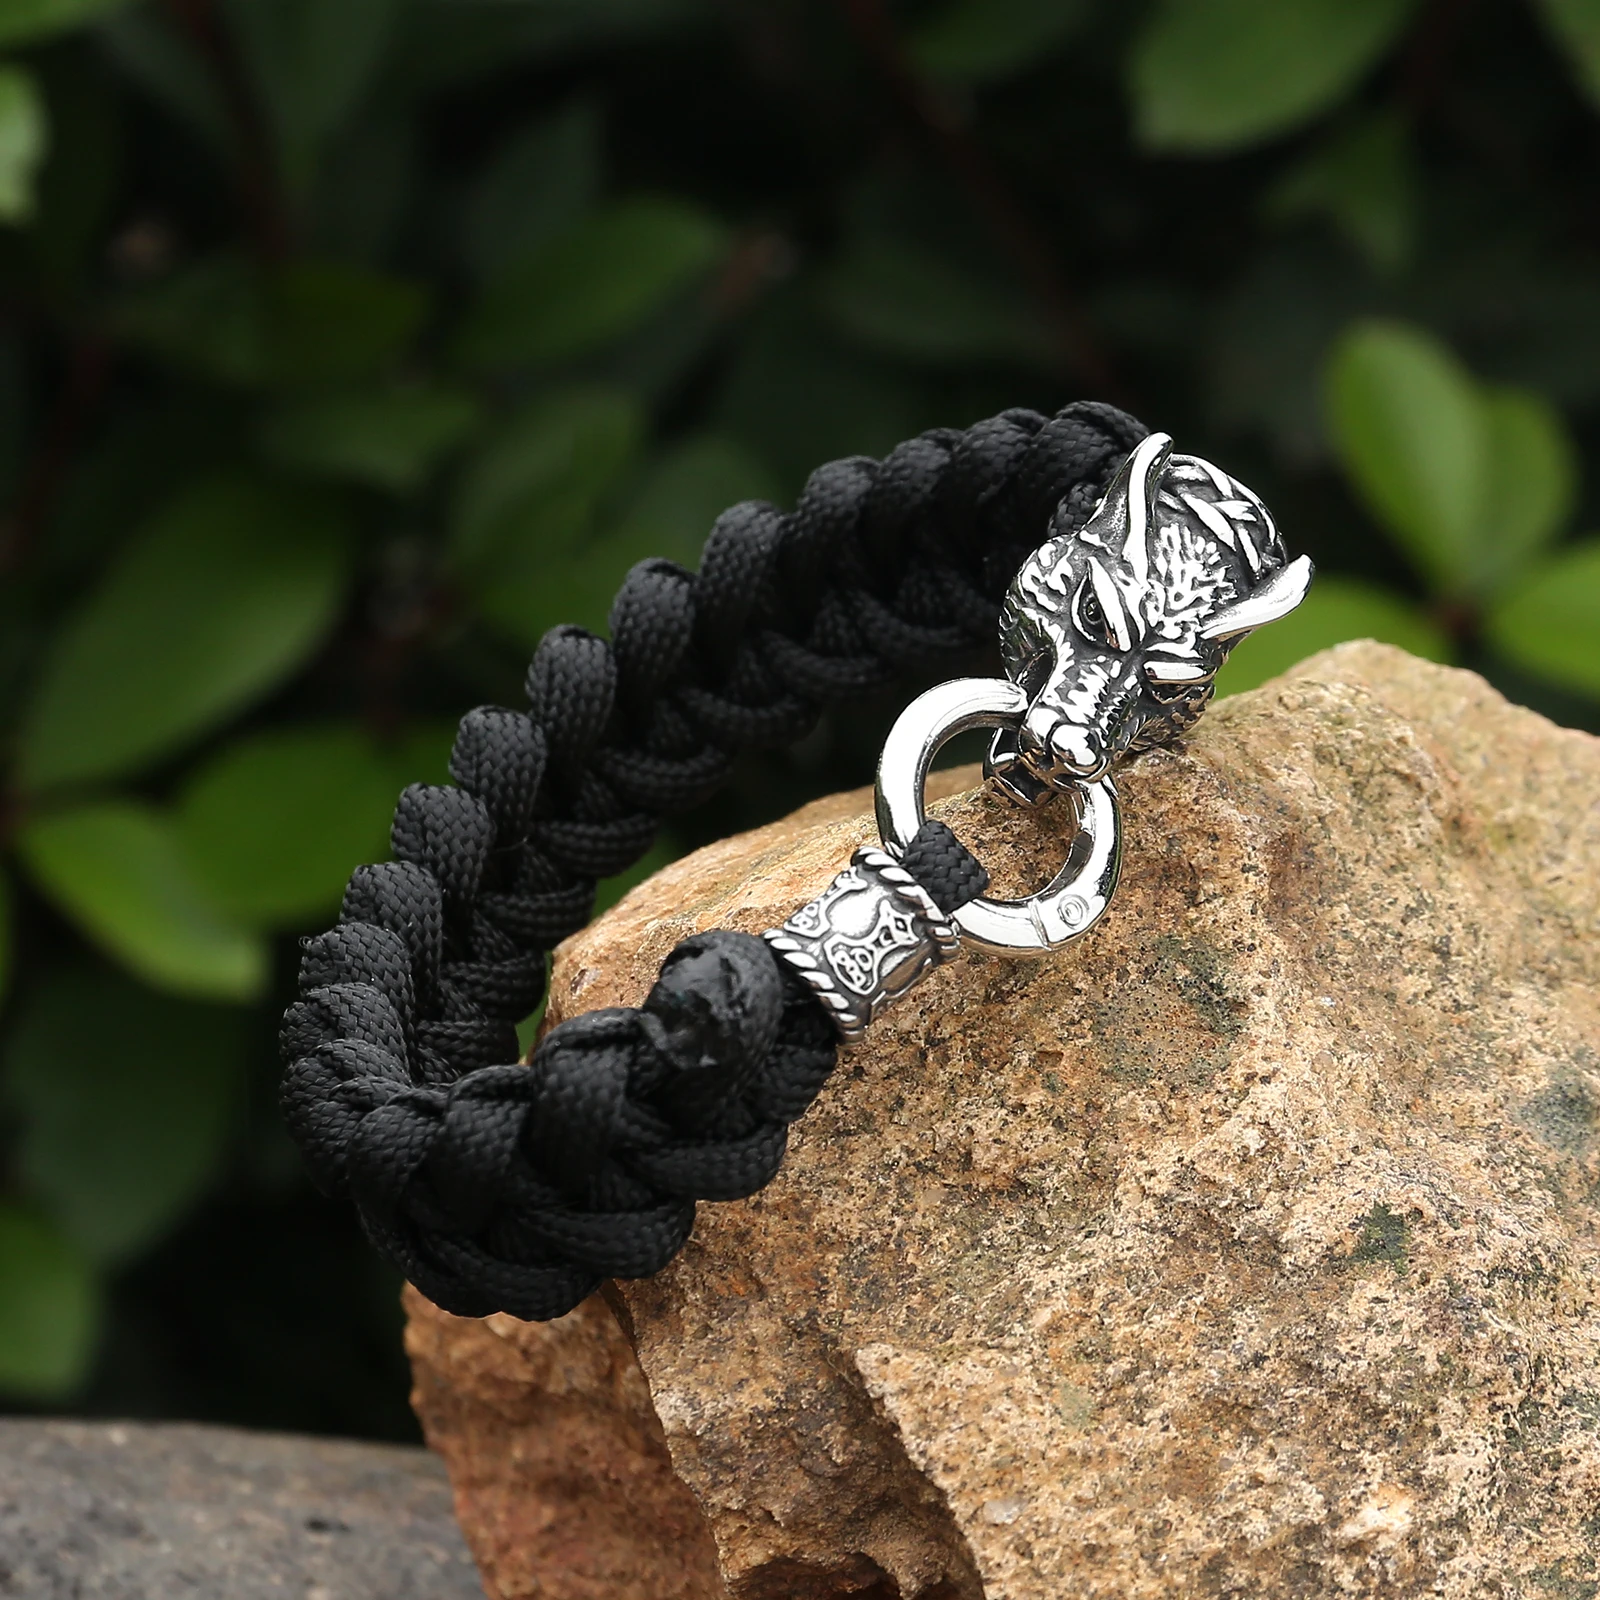 Handmade Paracord Bracelet With Stainless Steel Thor's Hammer and Bead